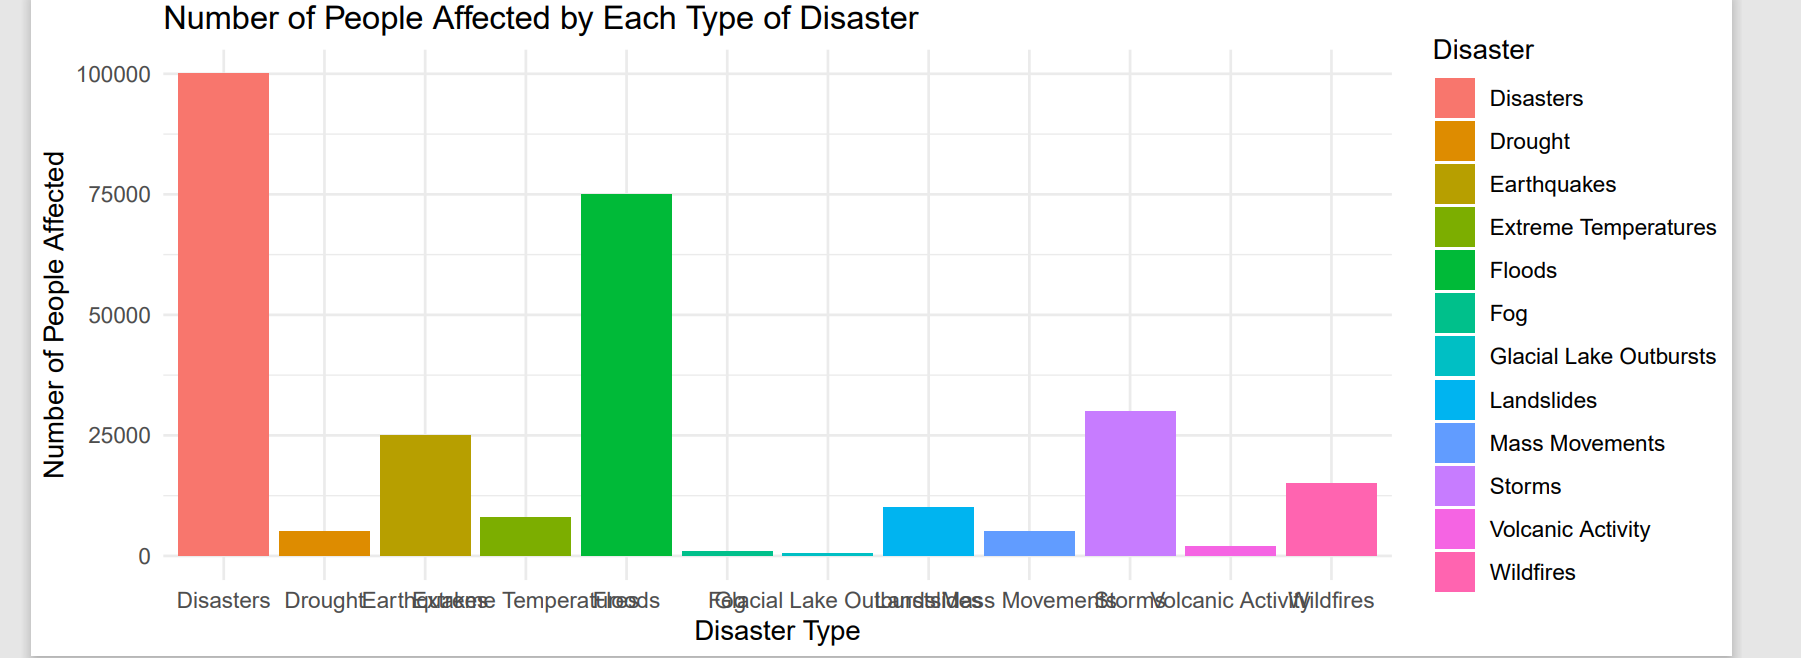 Sample analysis for the types of disasters